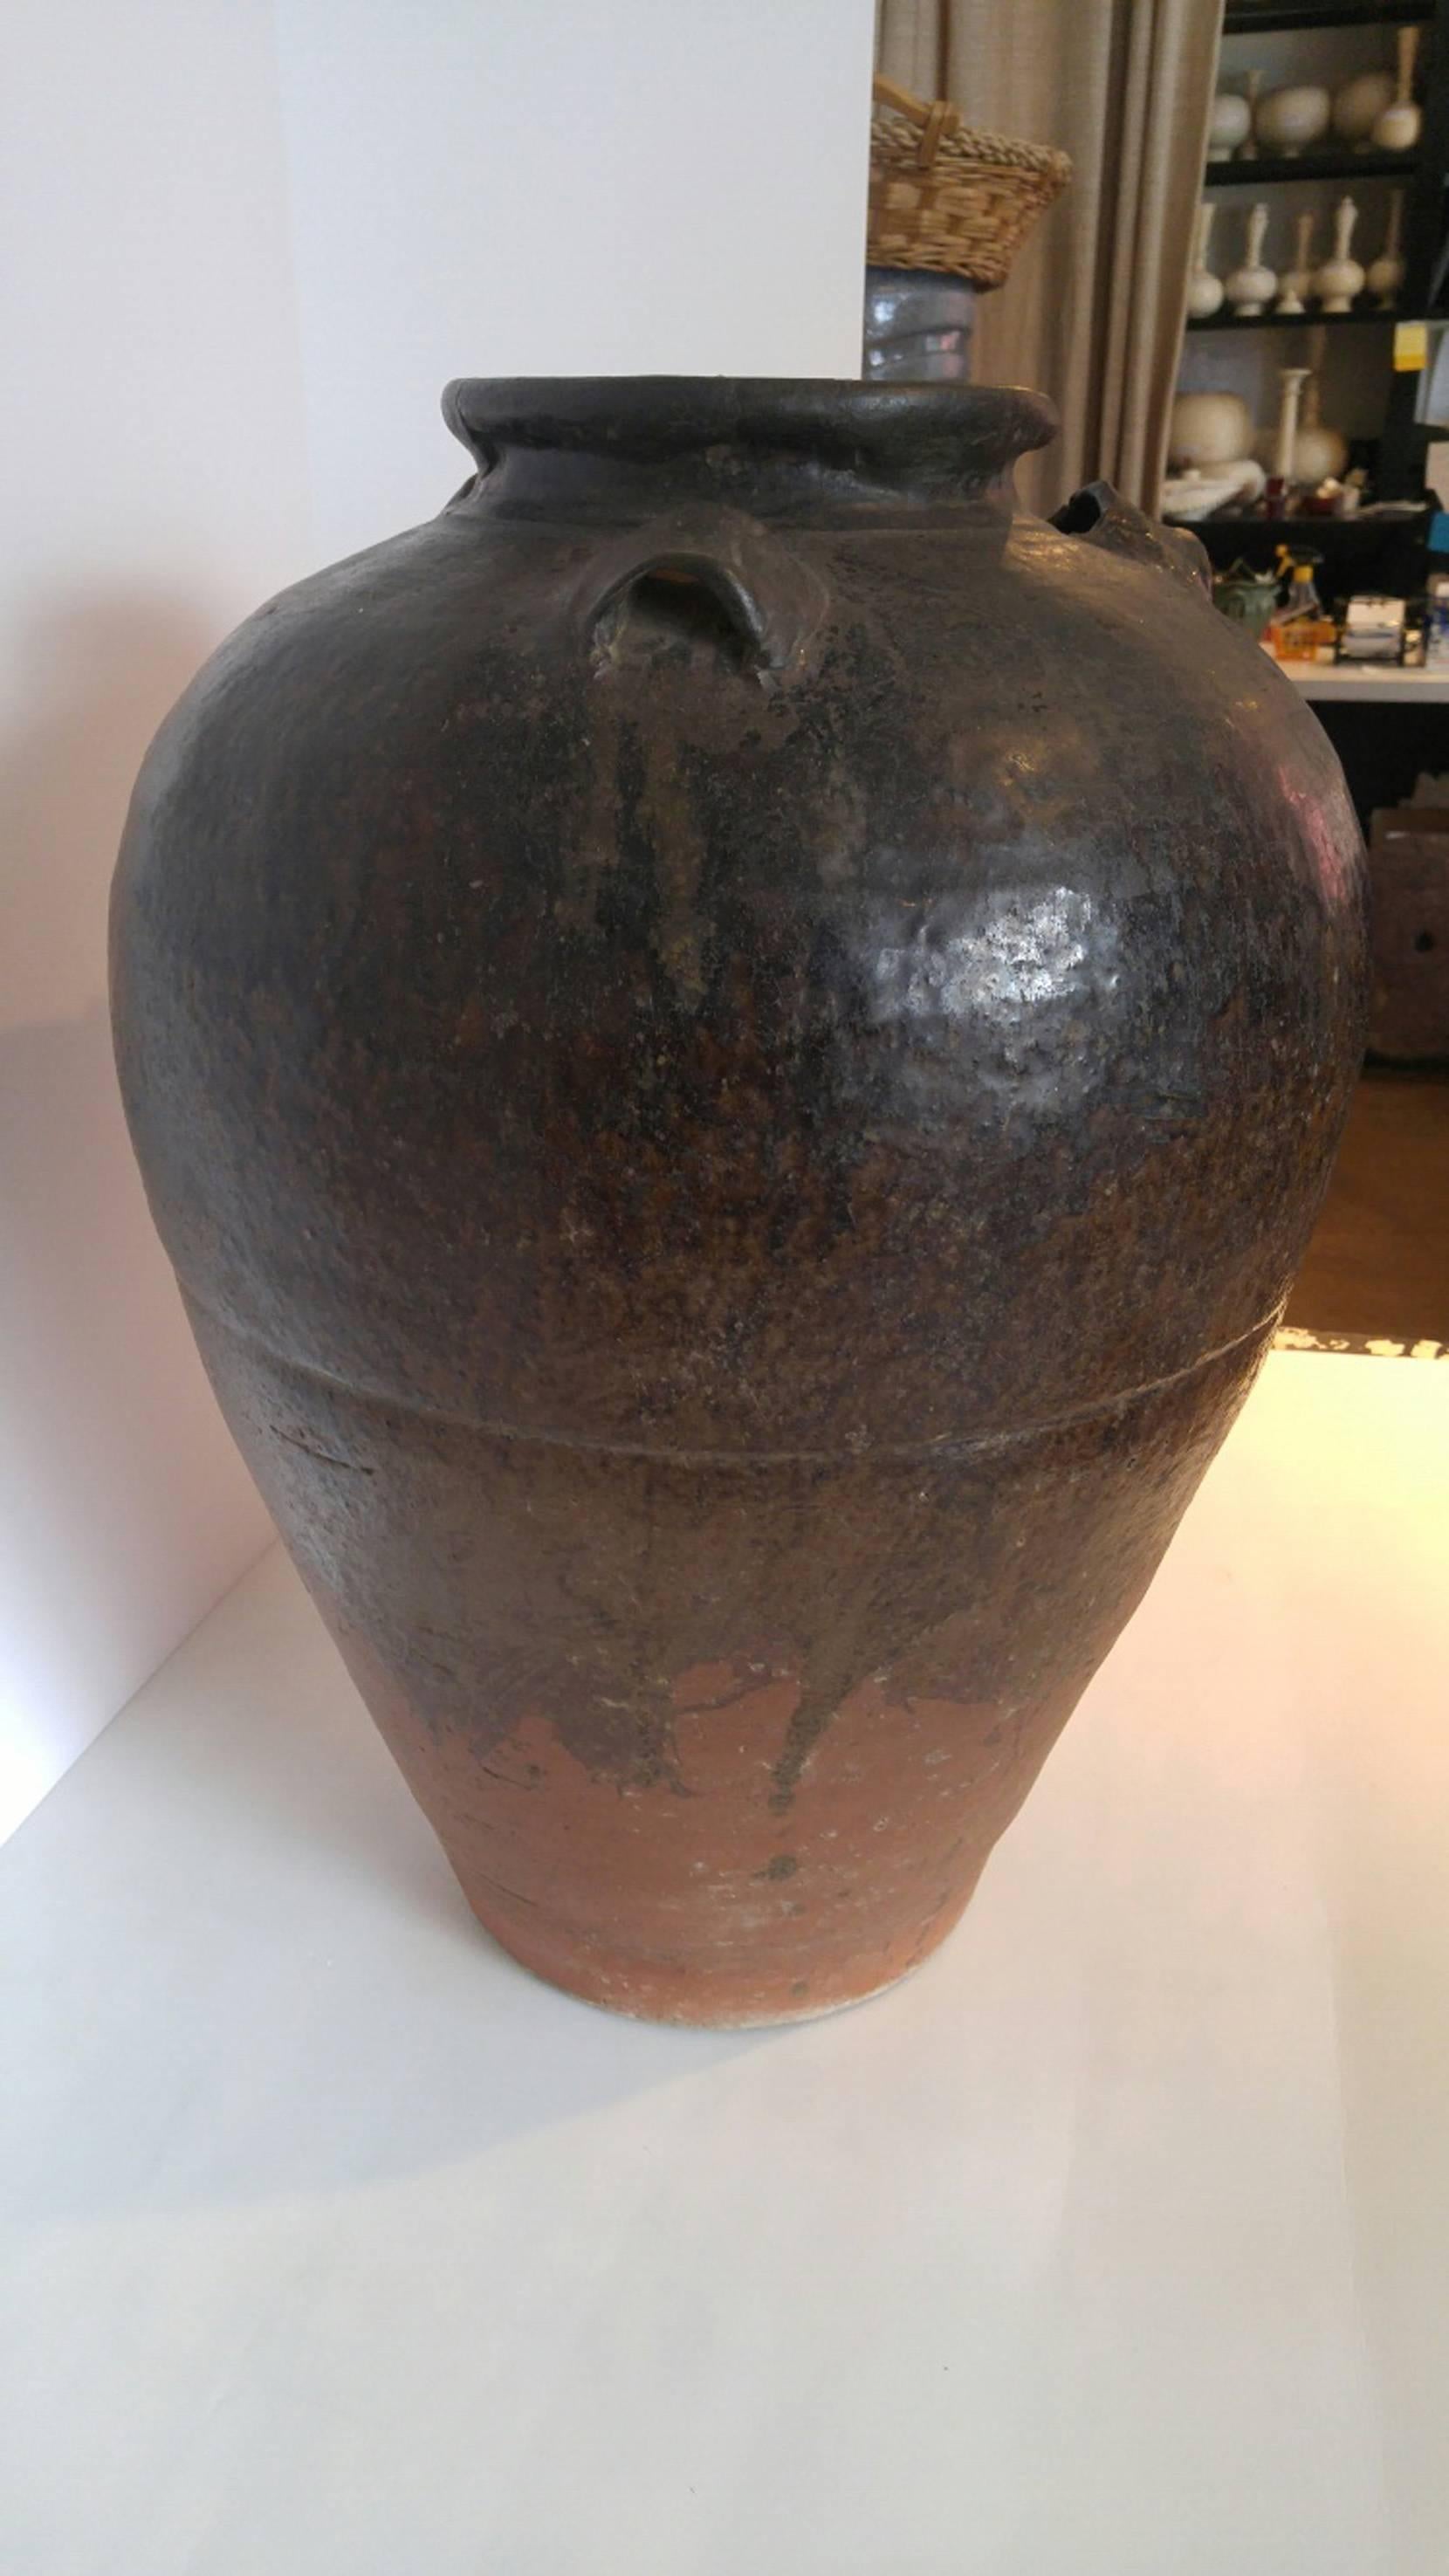 Indian Large Clay Pot or Vase in a Dark Glaze